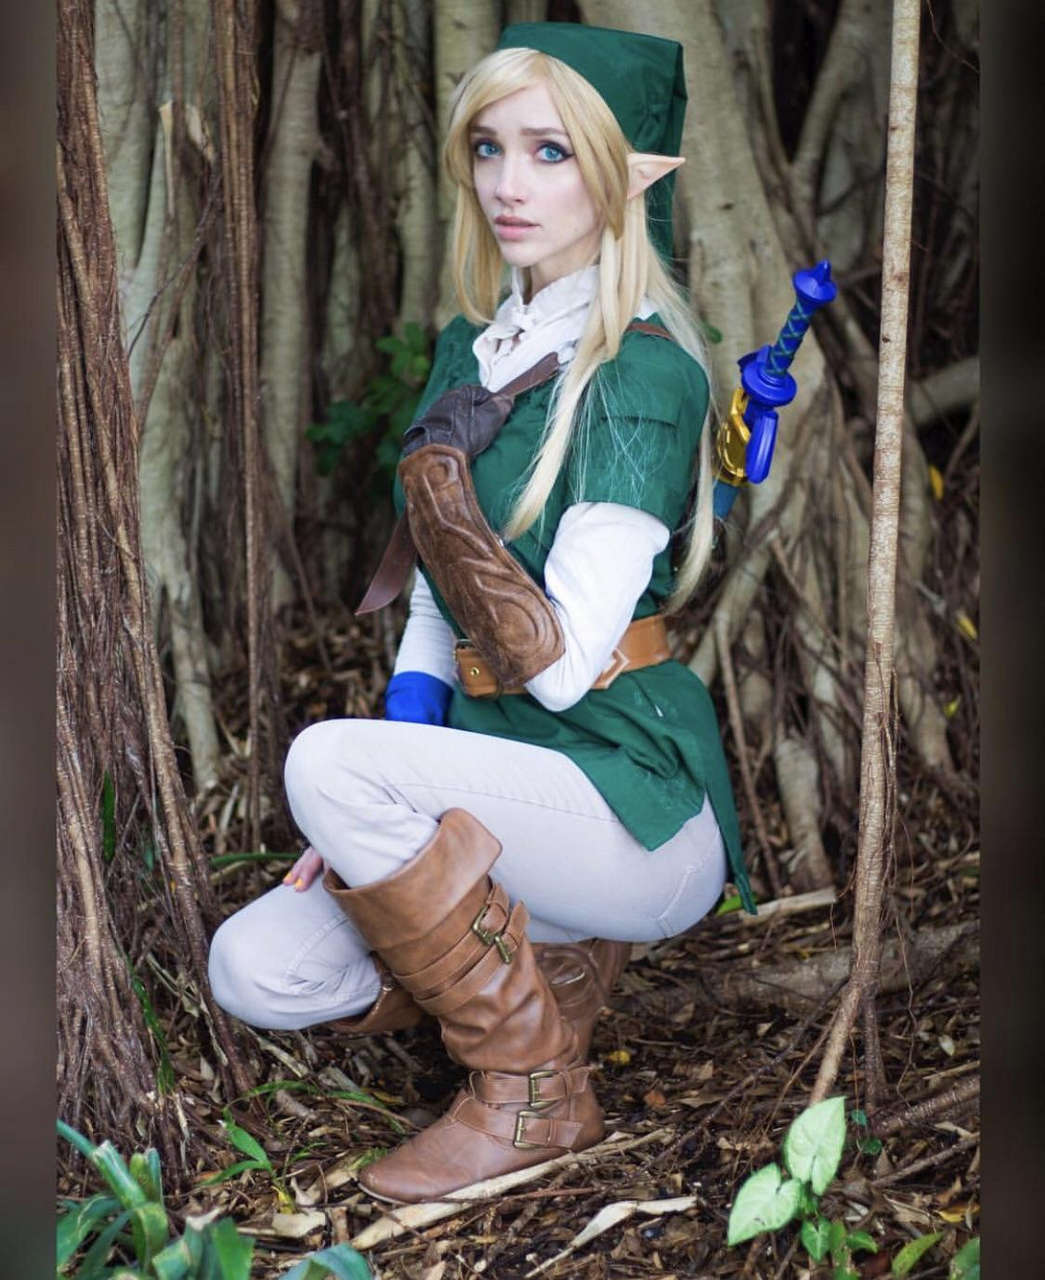 Link From The Legend Of Zelda By Lyz Brickley 0